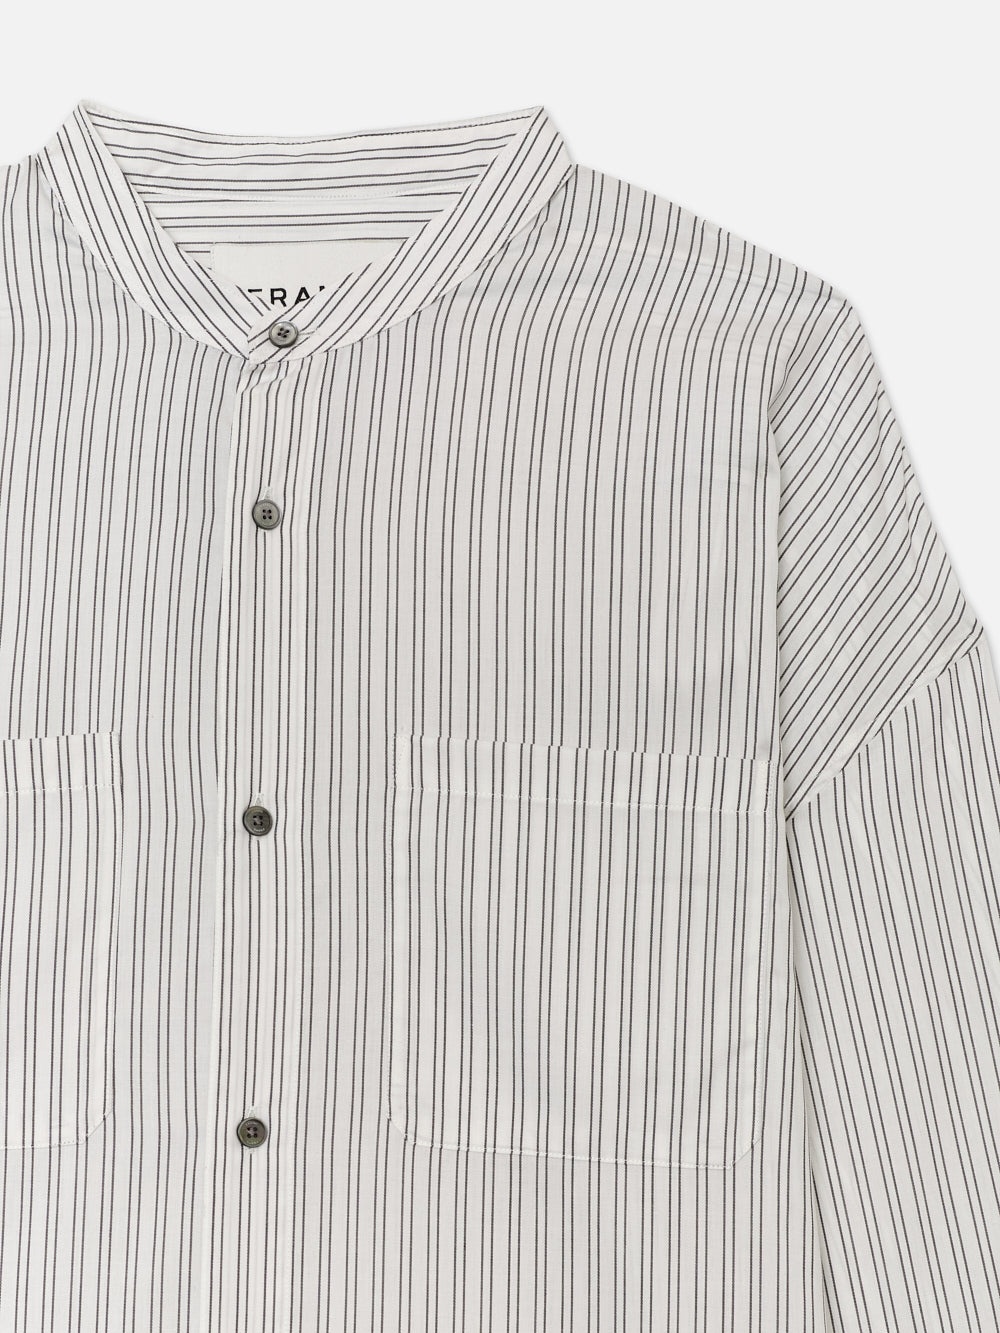 Relaxed Striped Shirt in Black White Stripe - 2